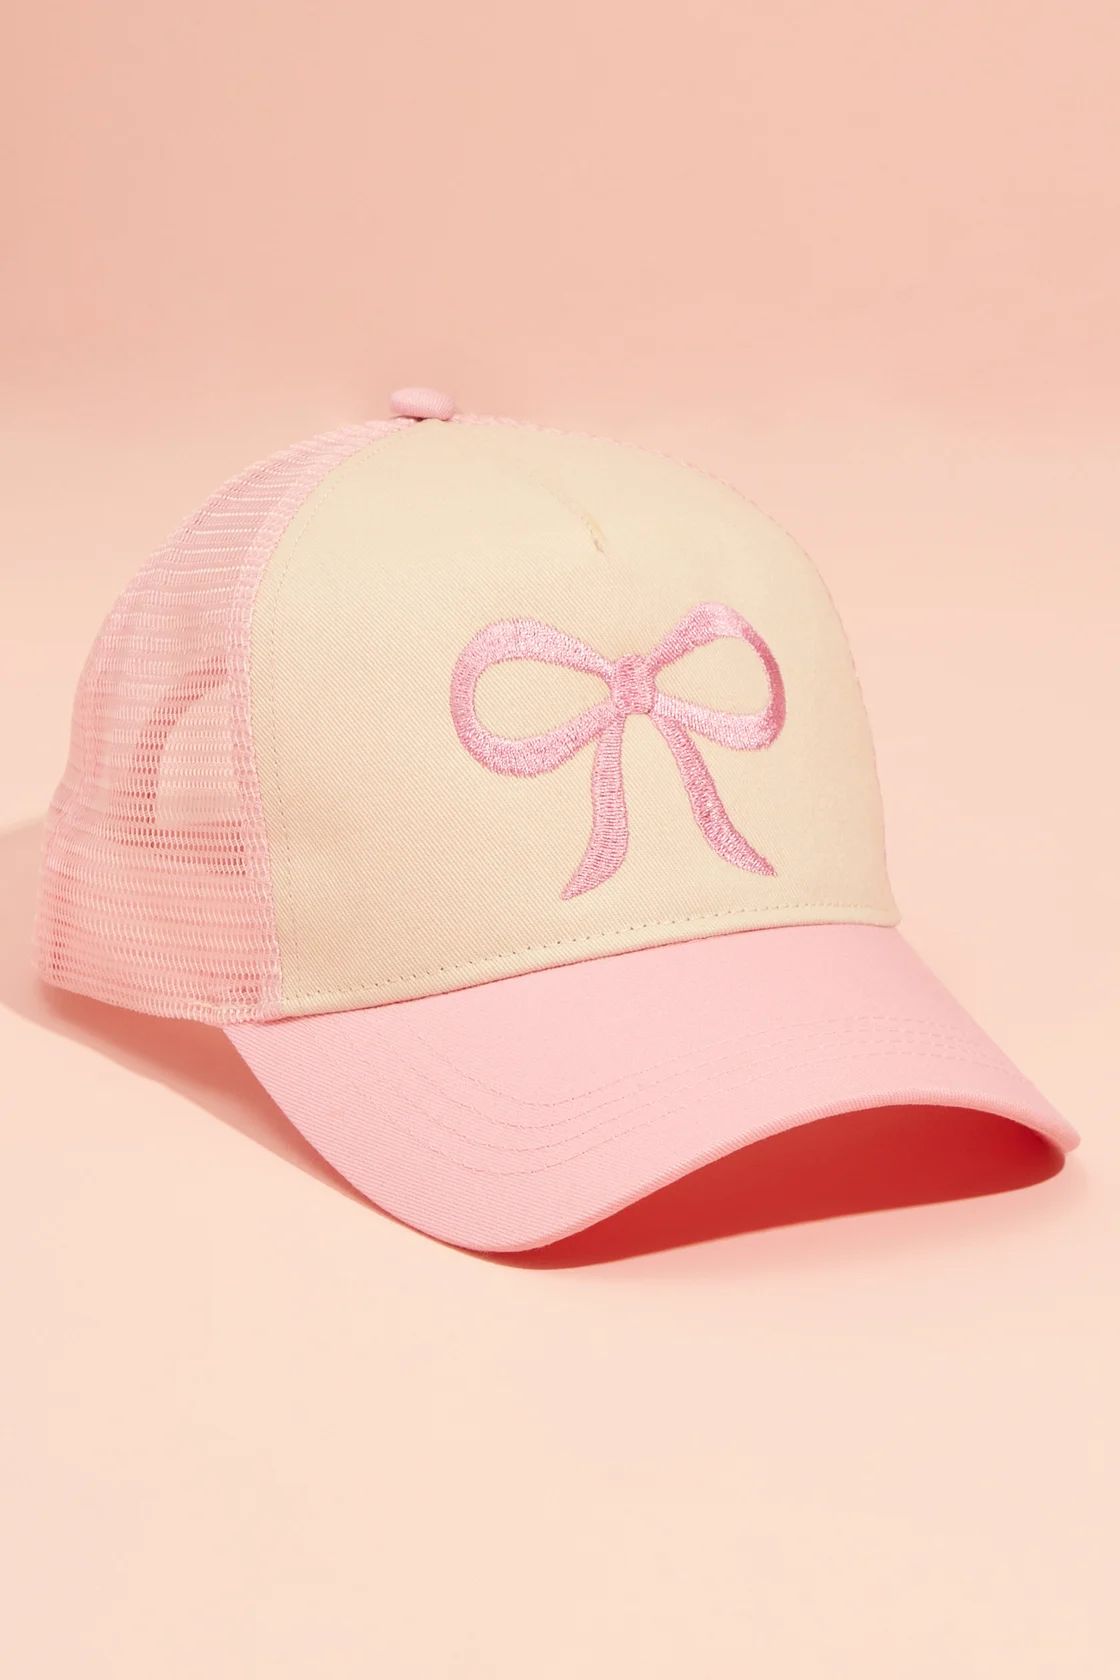 Bow Trucker Hat | Altar'd State